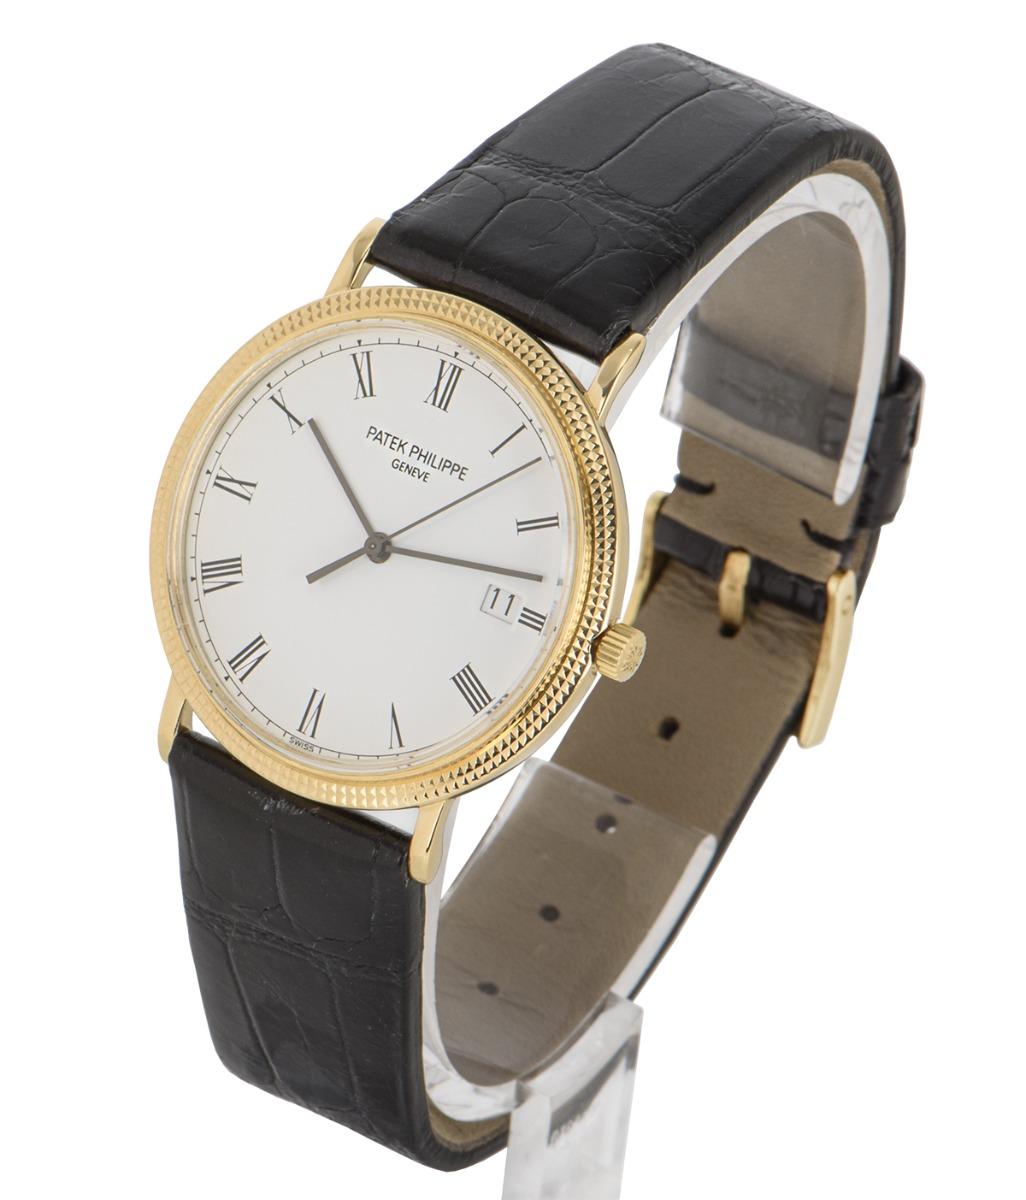 A 33 mm yellow gold Calatrava by Patek Philippe, featuring a porcelain white dial with Roman numerals and the date displayed at 3 o'clock. The generic black leather strap comes with an original yellow gold pin buckle. Fitted with sapphire crystal